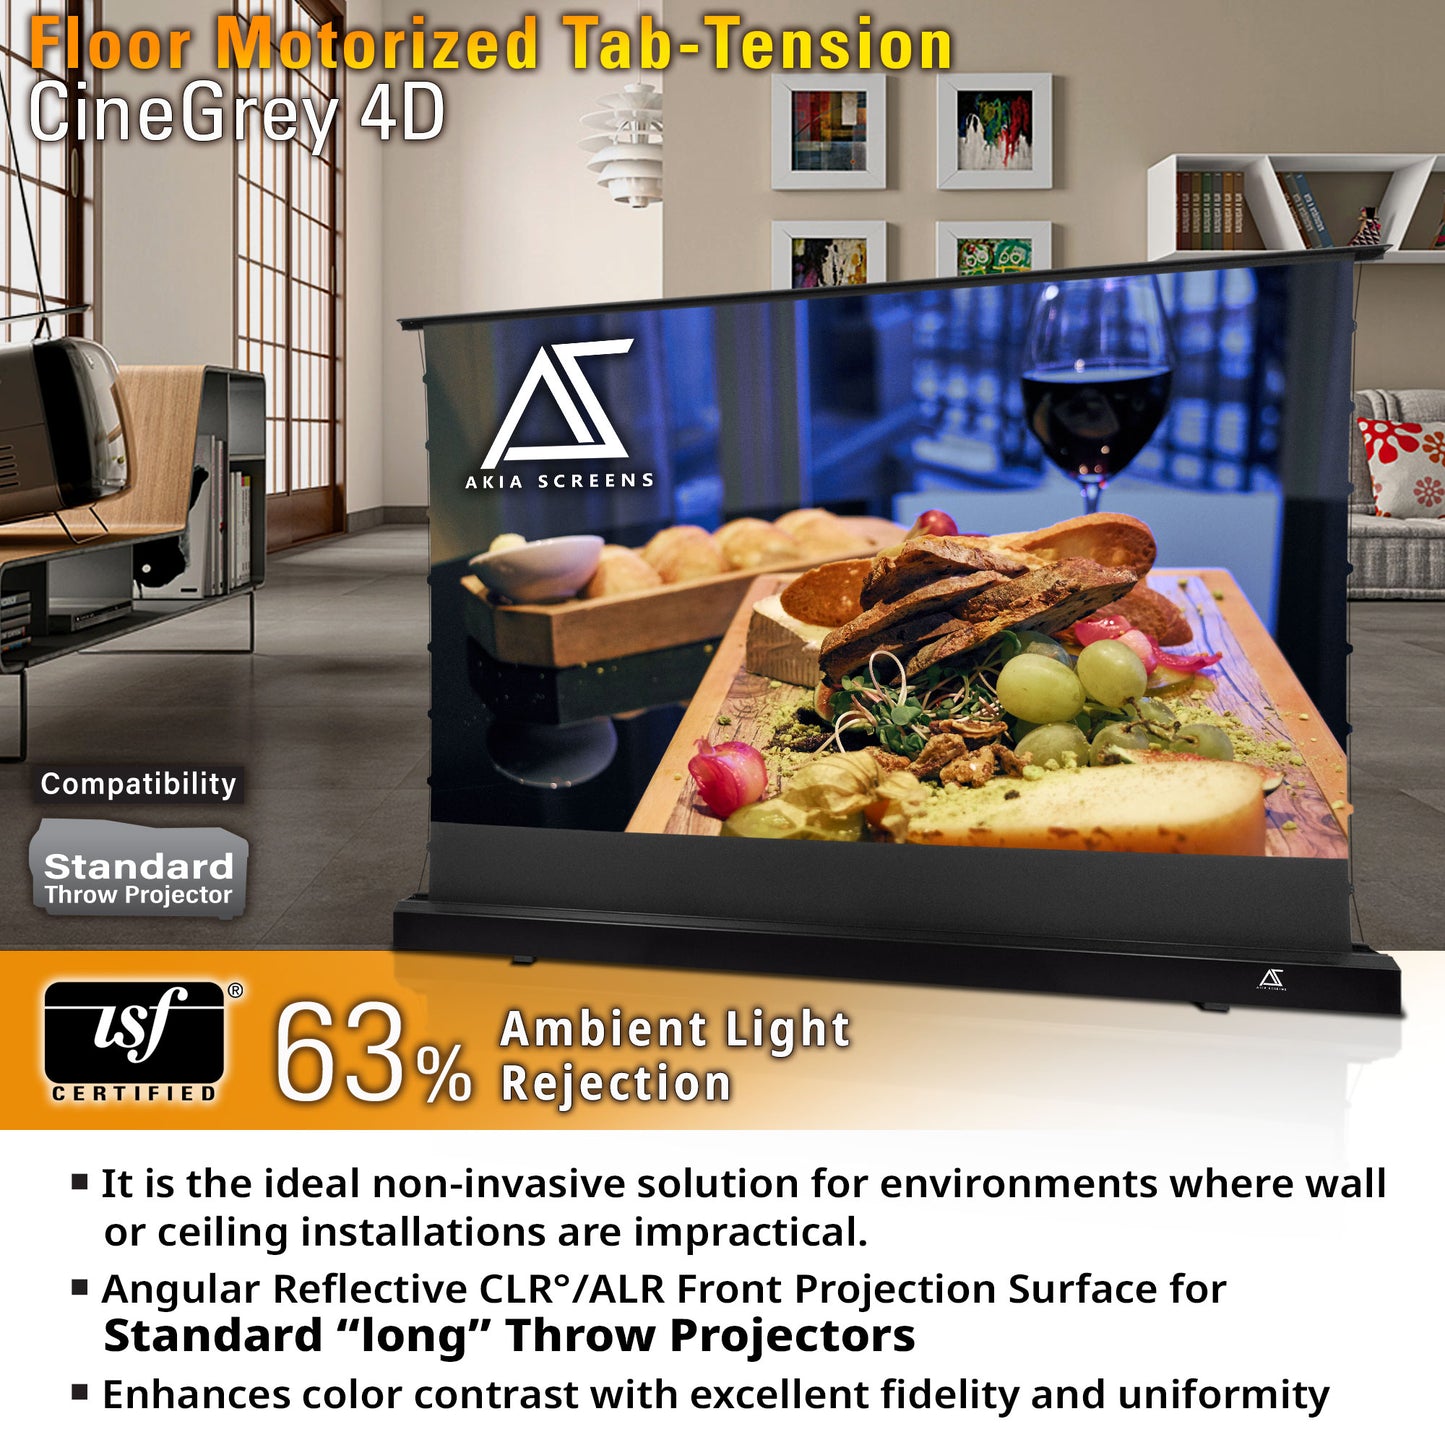 Floor Motorized Tab-Tension CineGrey 4D Ambient Light Rejecting Projection Screen